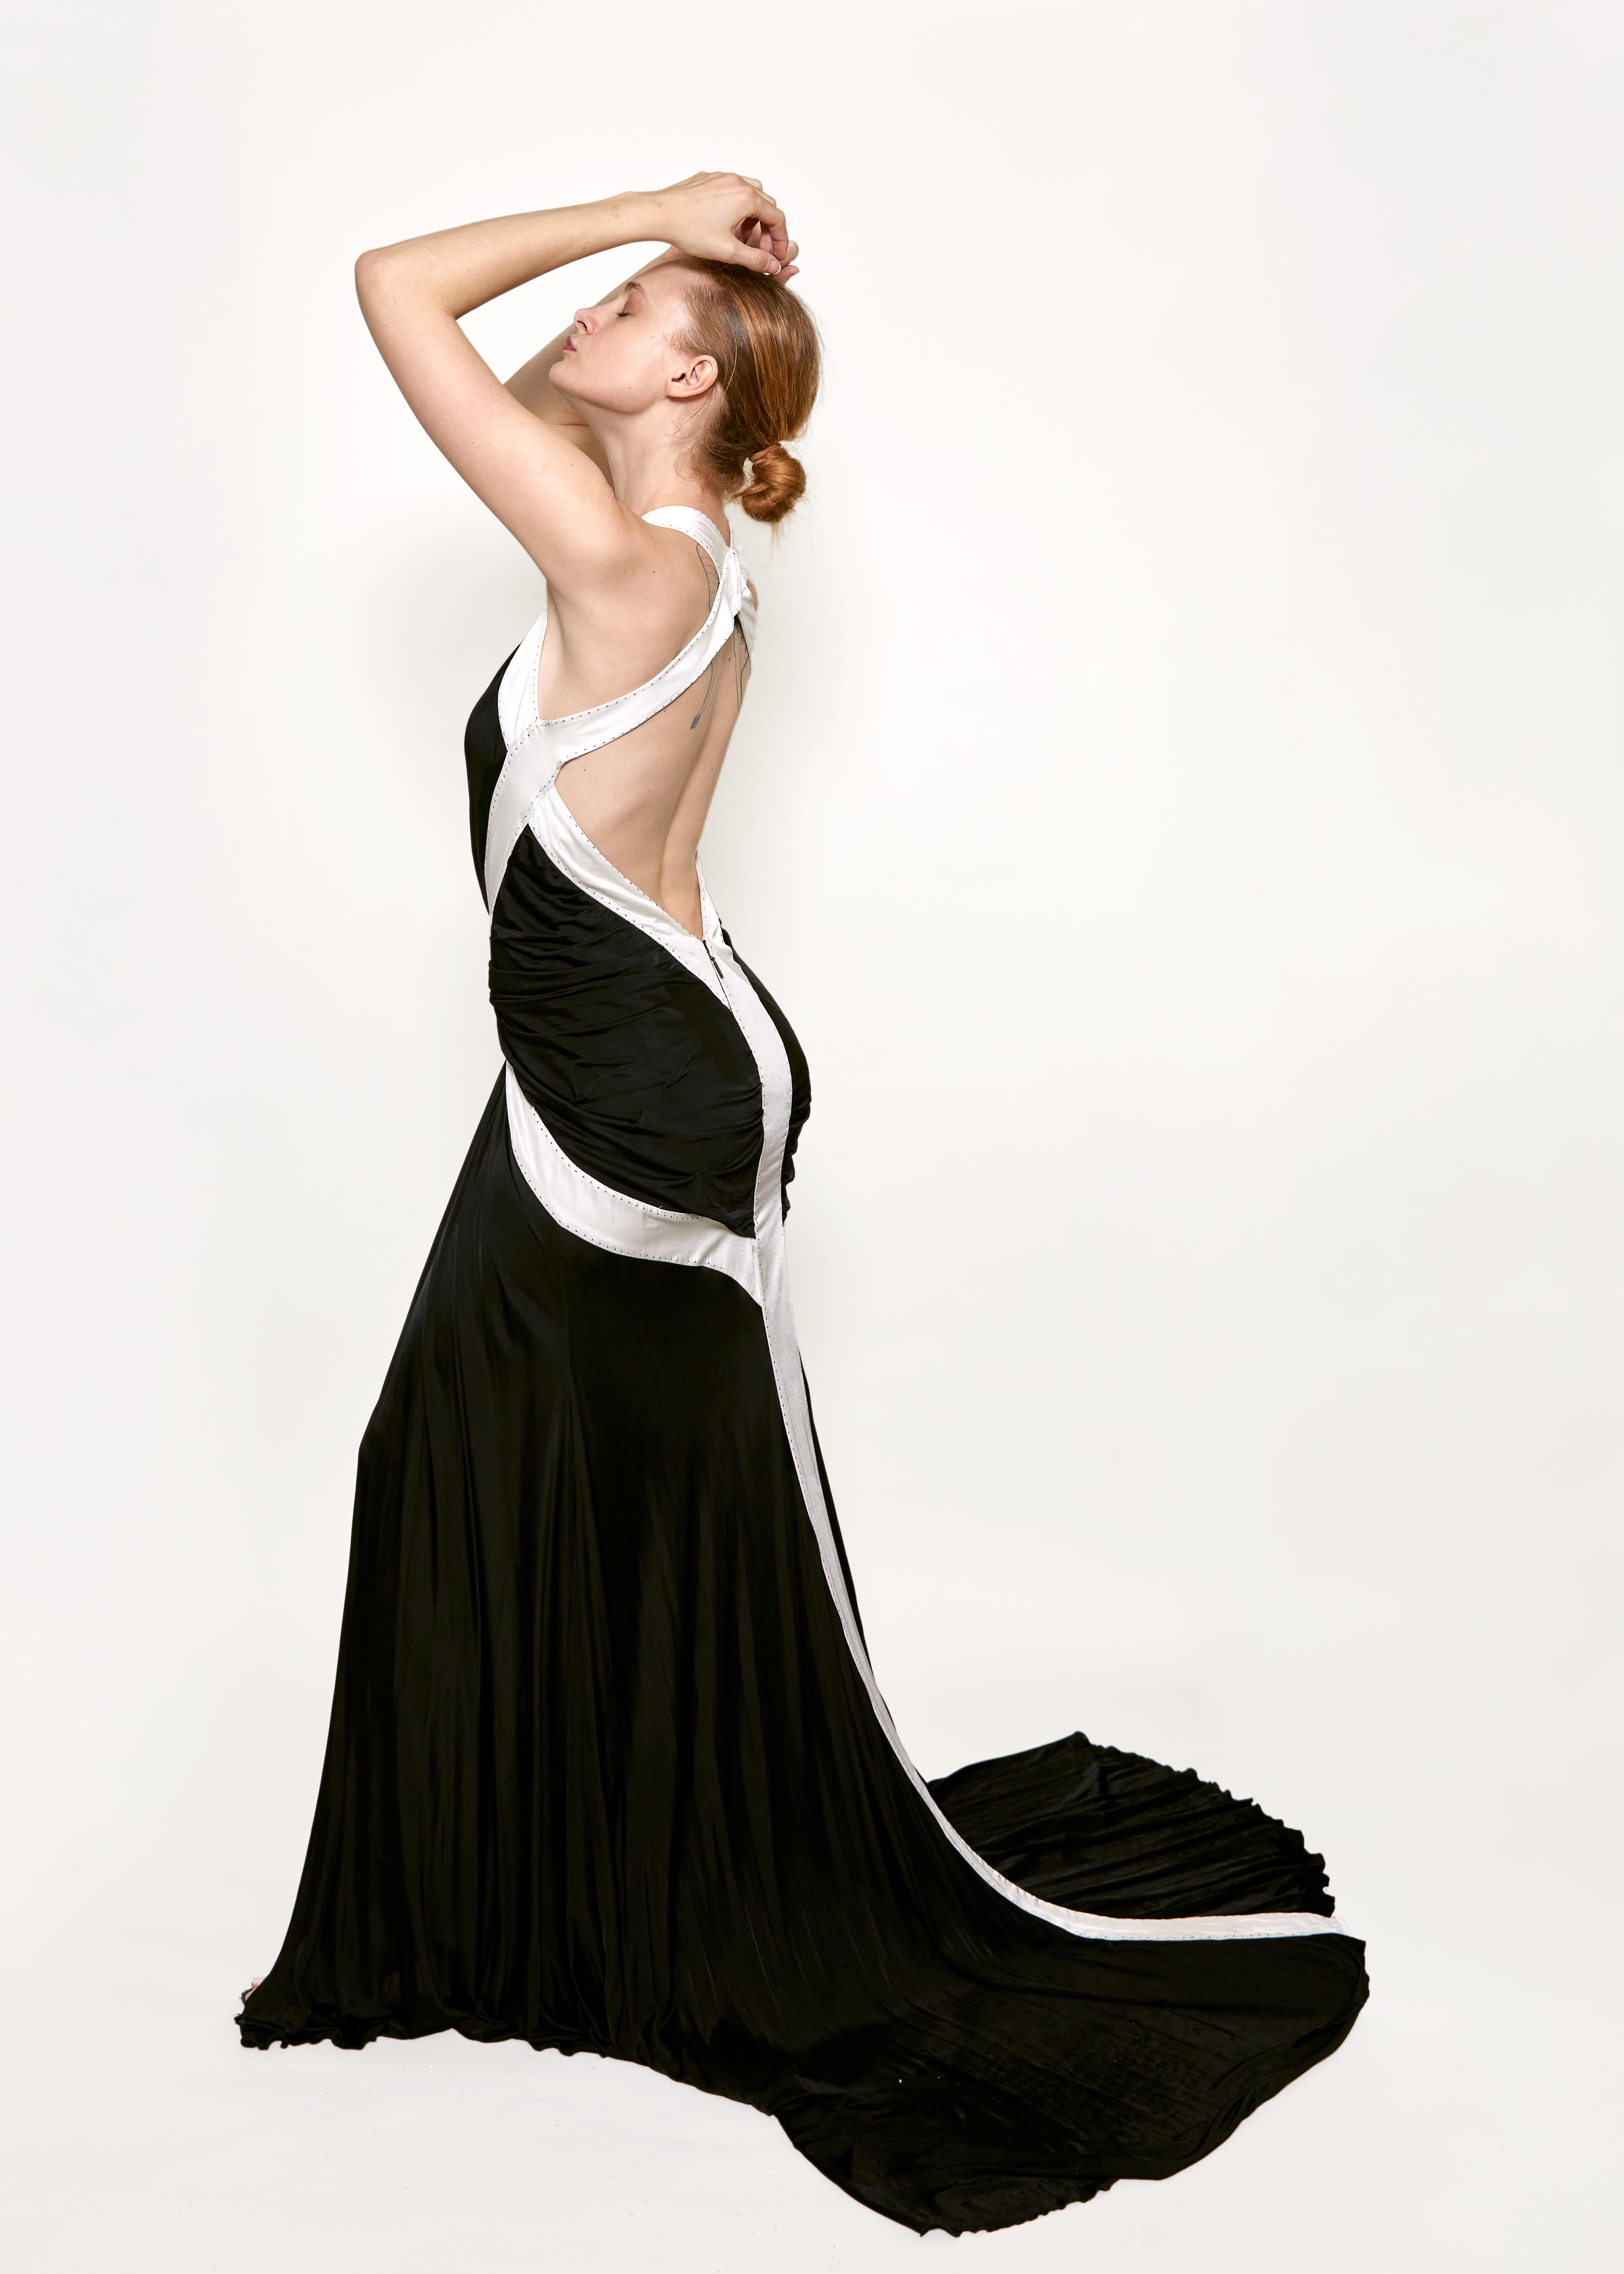 Indulge in pure elegance with Roberto Cavalli's 2008 Black/White Low Back Gown. This sophisticated gown boasts a deep plunge V-neckline and geometric color blocking, creating a stunning and exclusive look. The low back and extended train adds a